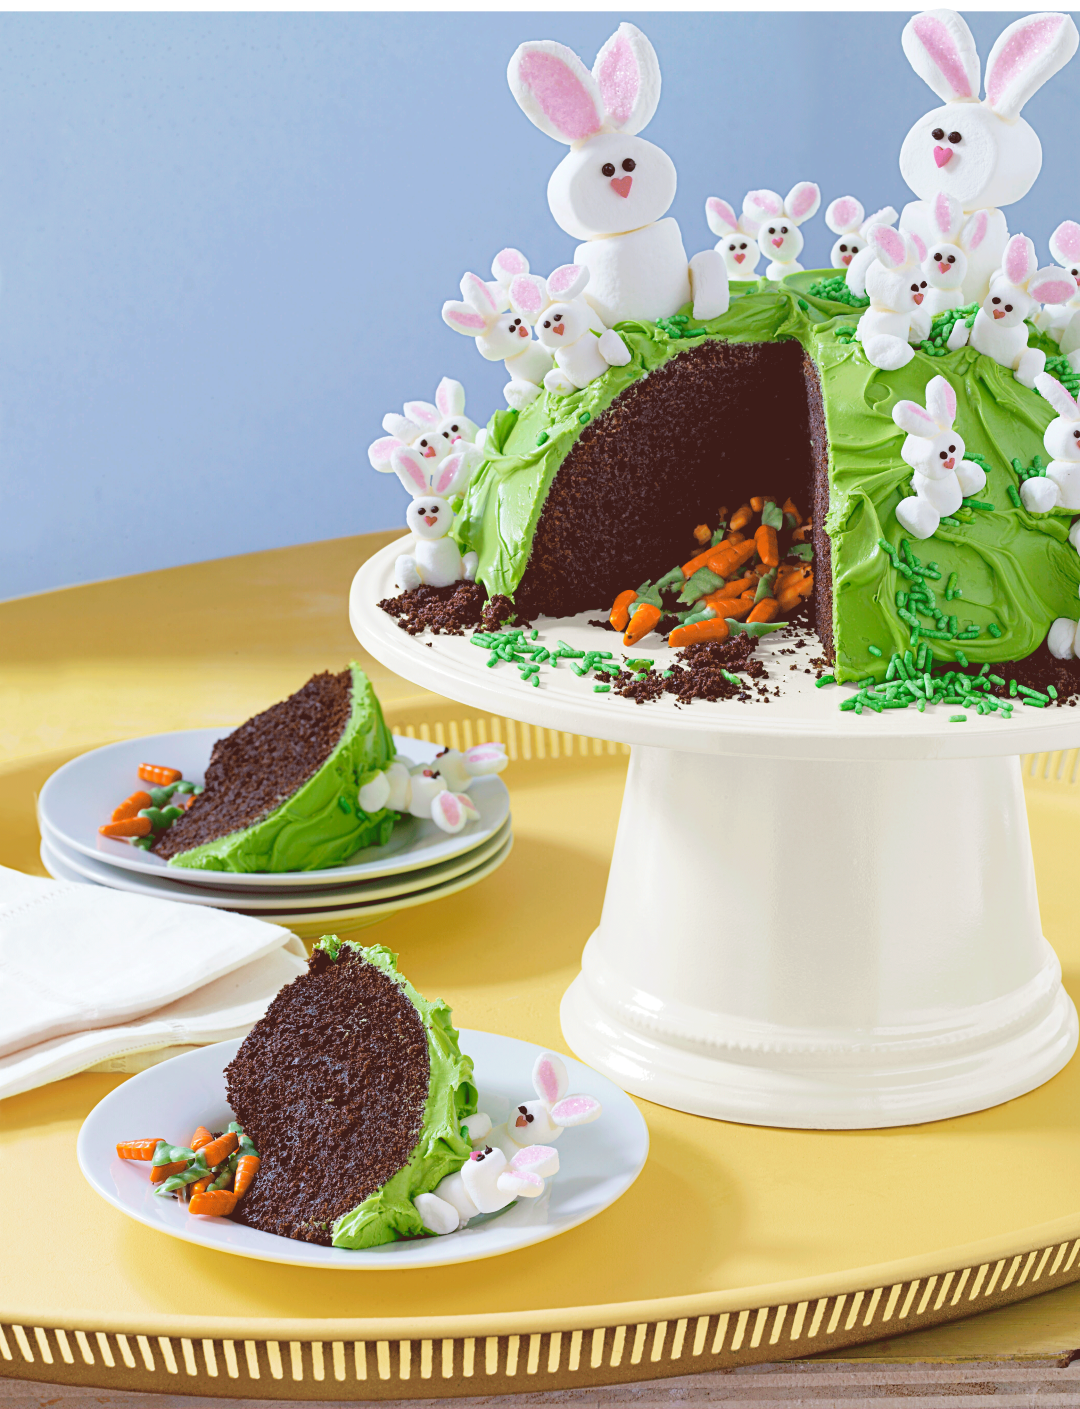 Chocolate Easter Cake - it's so simple! - Easy Peasy Lemon Squeezy